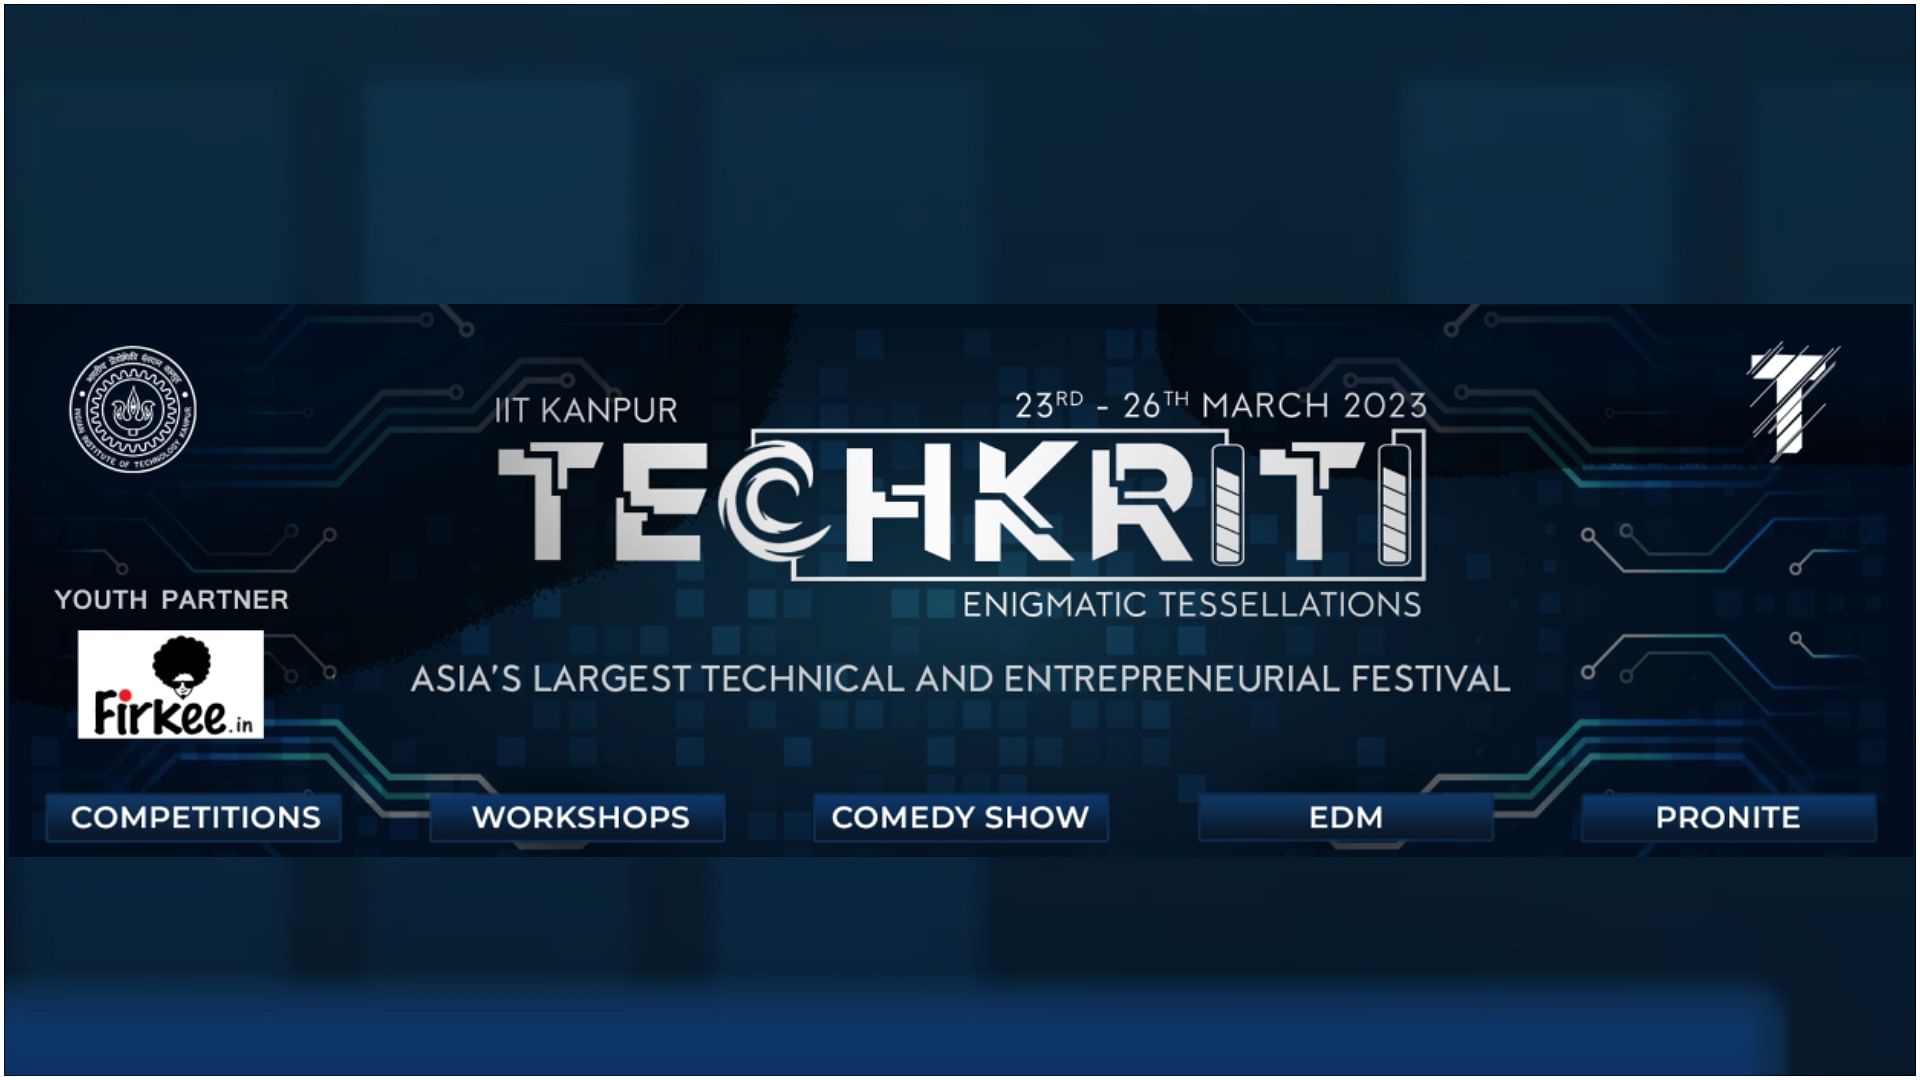 Techkriti 2023 Asia biggest technical and entrepreneurial festival from March 23 in IIT Kanpur